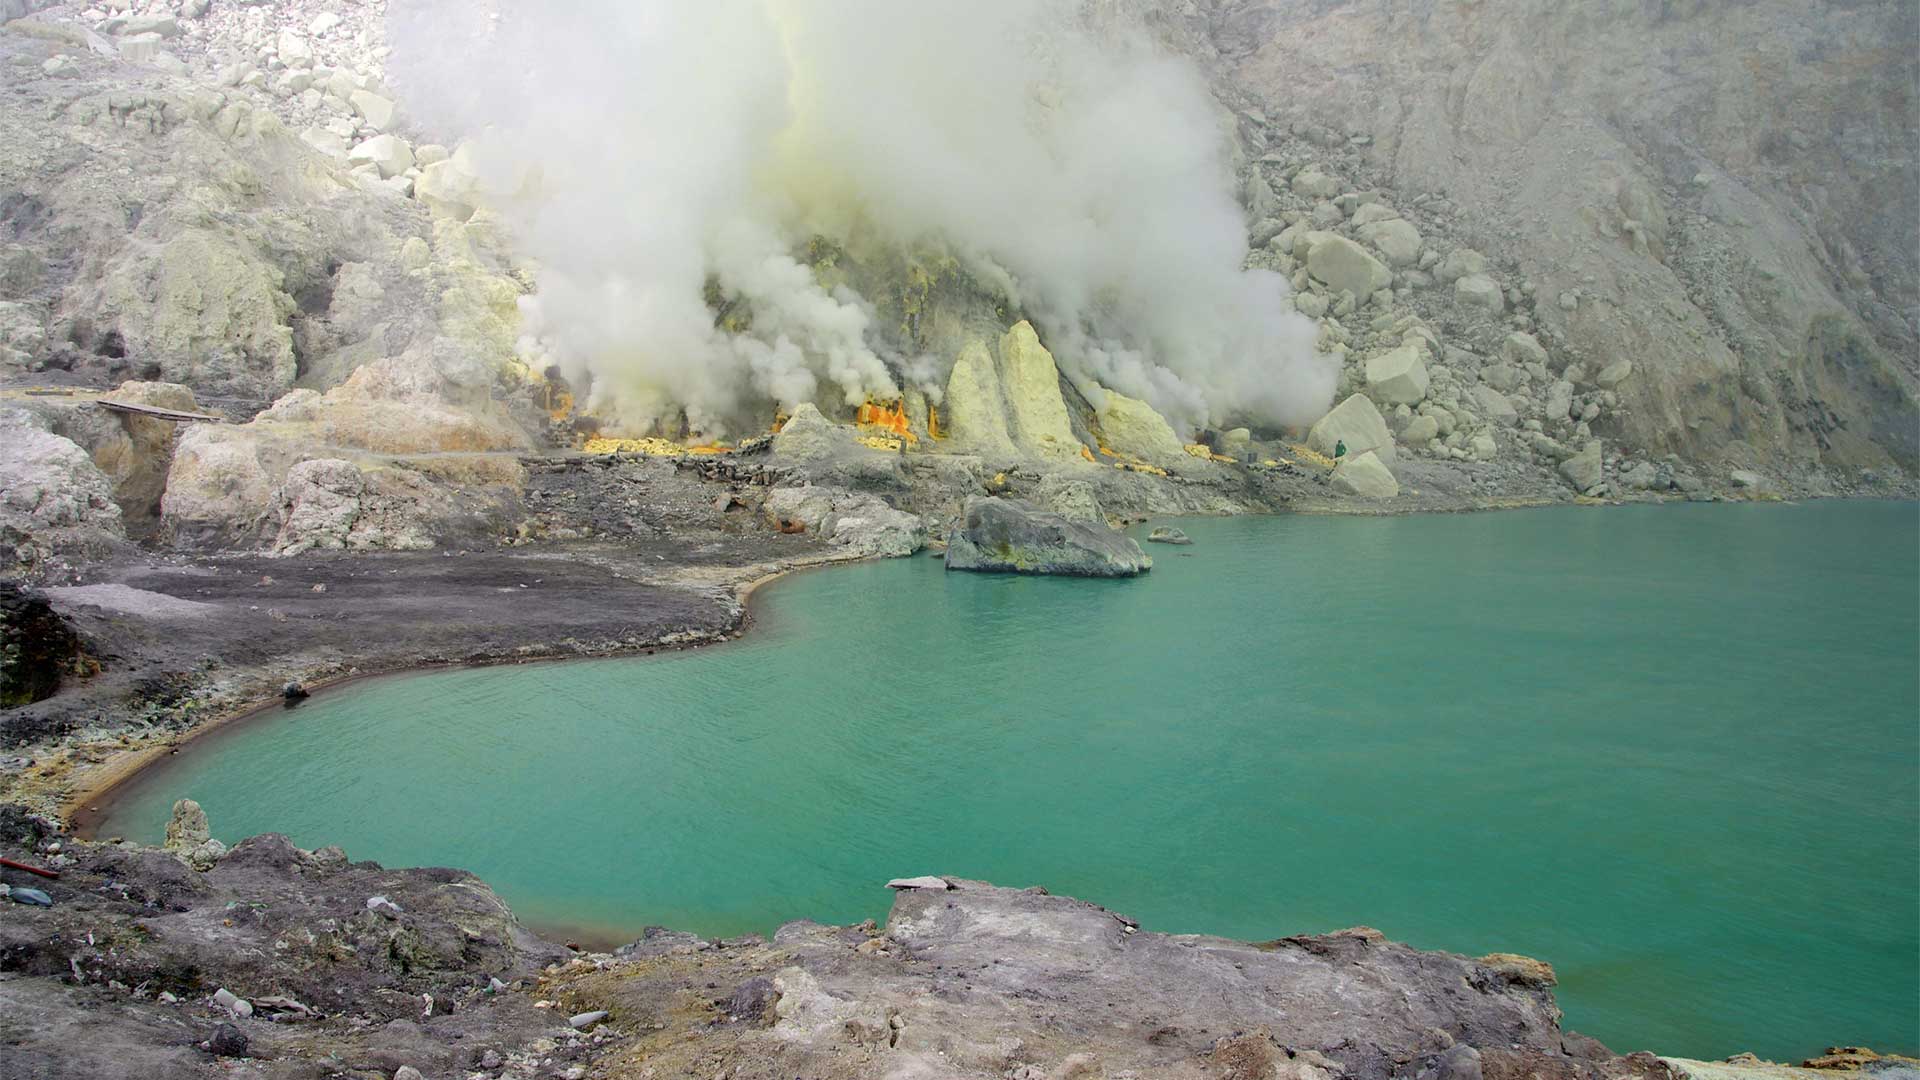 Crater, lake volcano in Indonesia